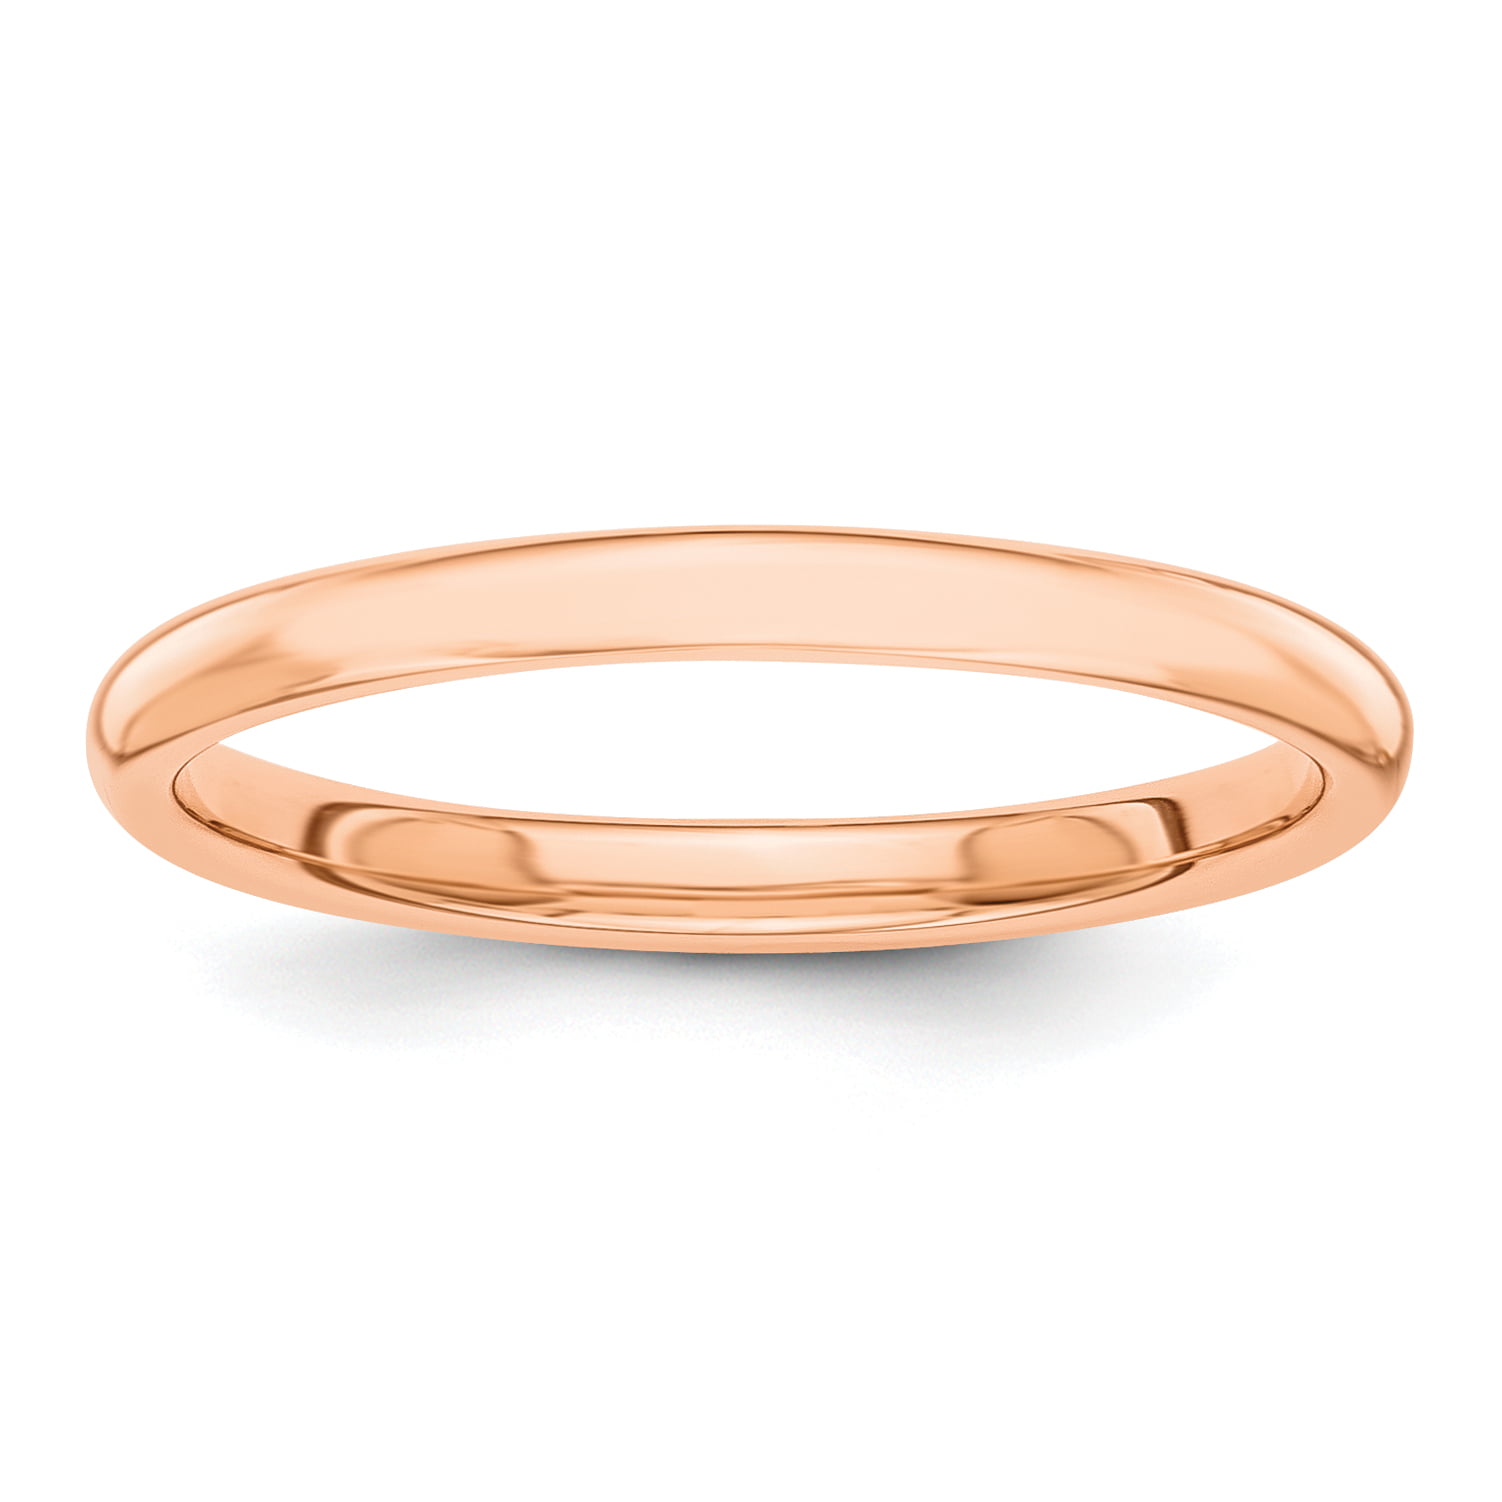 Best Price Product - 14k Rose Gold Polished 2mm Band